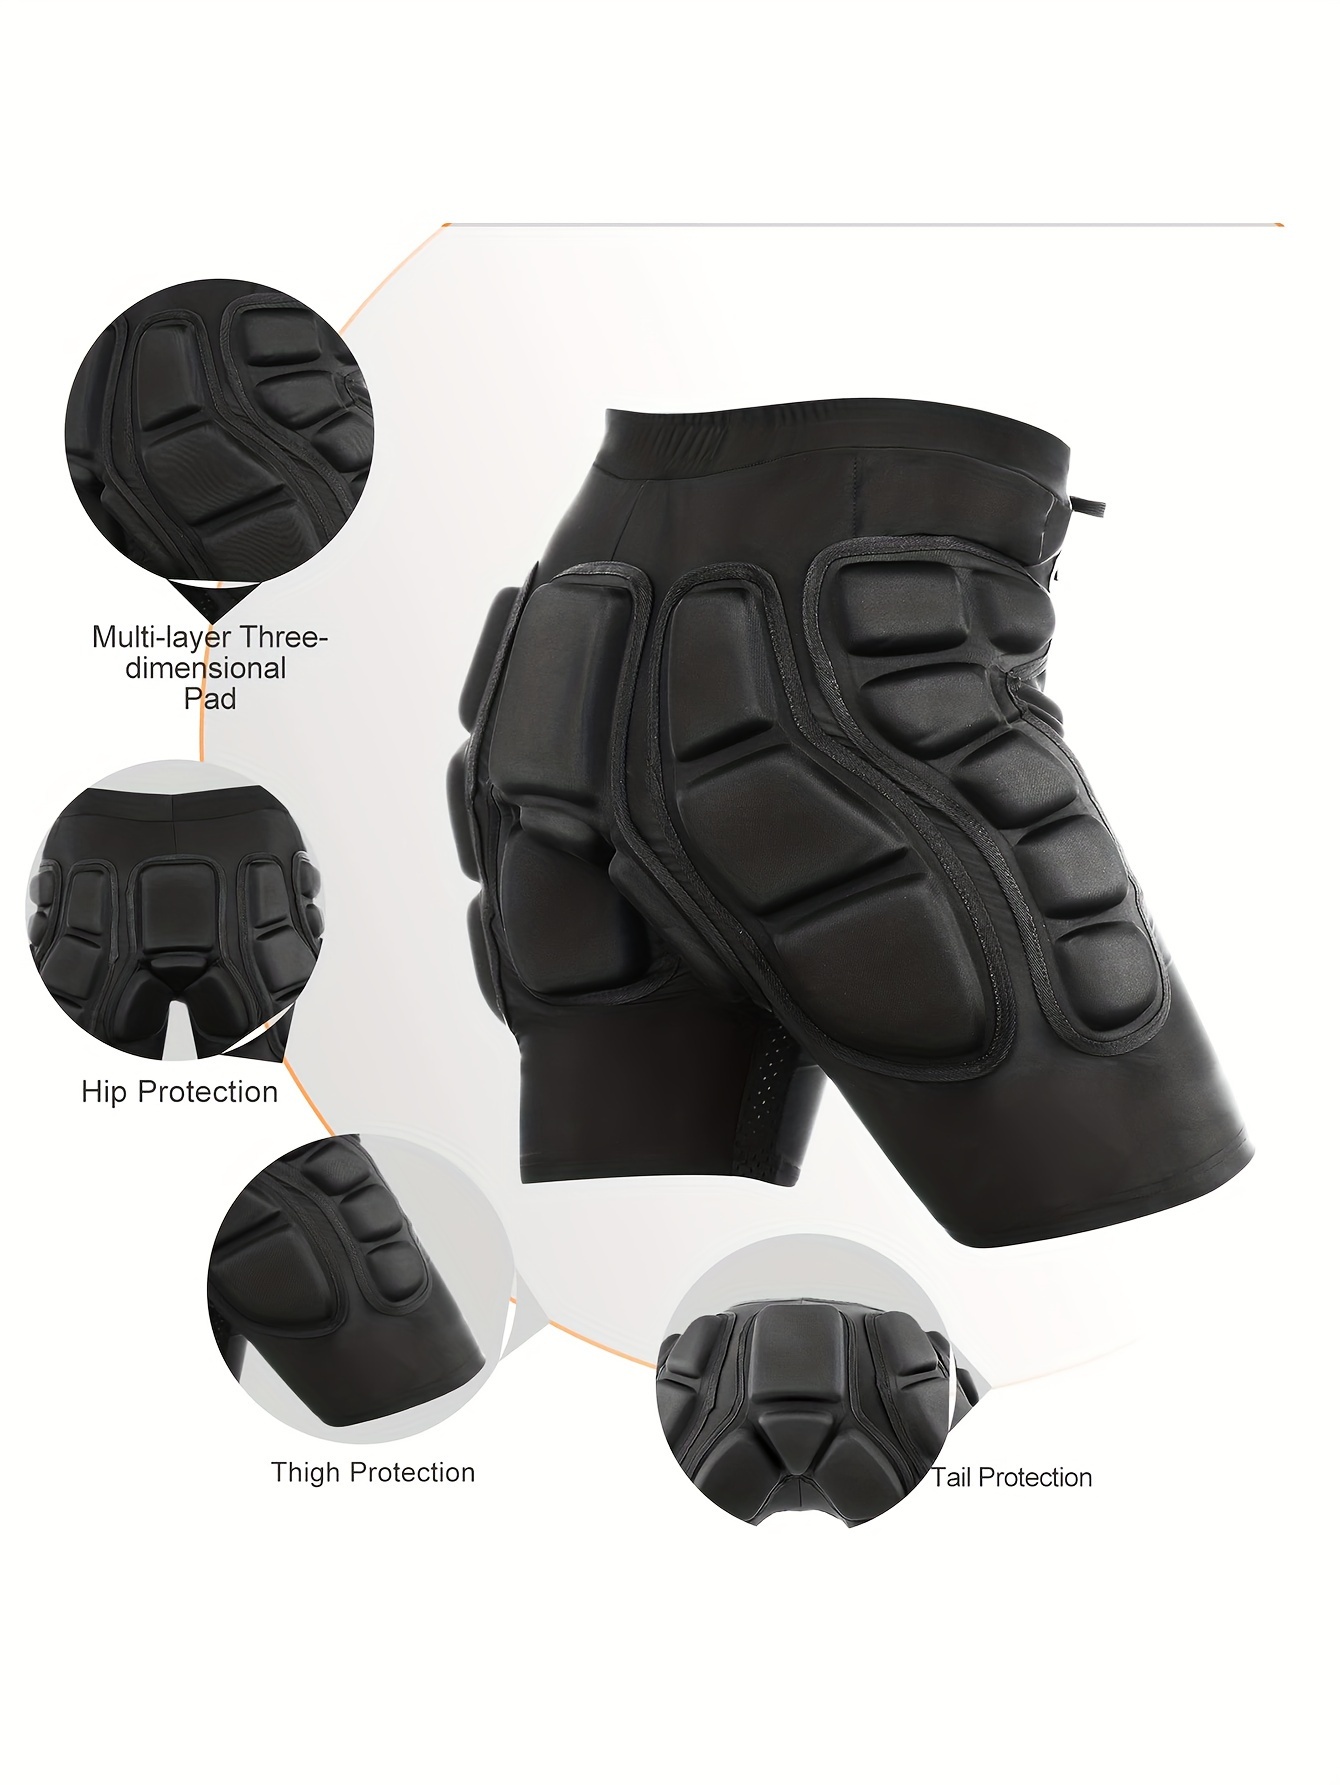 Snowboard Protection Padded Compression Shorts, (One Size Smaller) 3D  Protection For Hip, 2.03cm Thick Ski Butt Pad, Order One Size Up